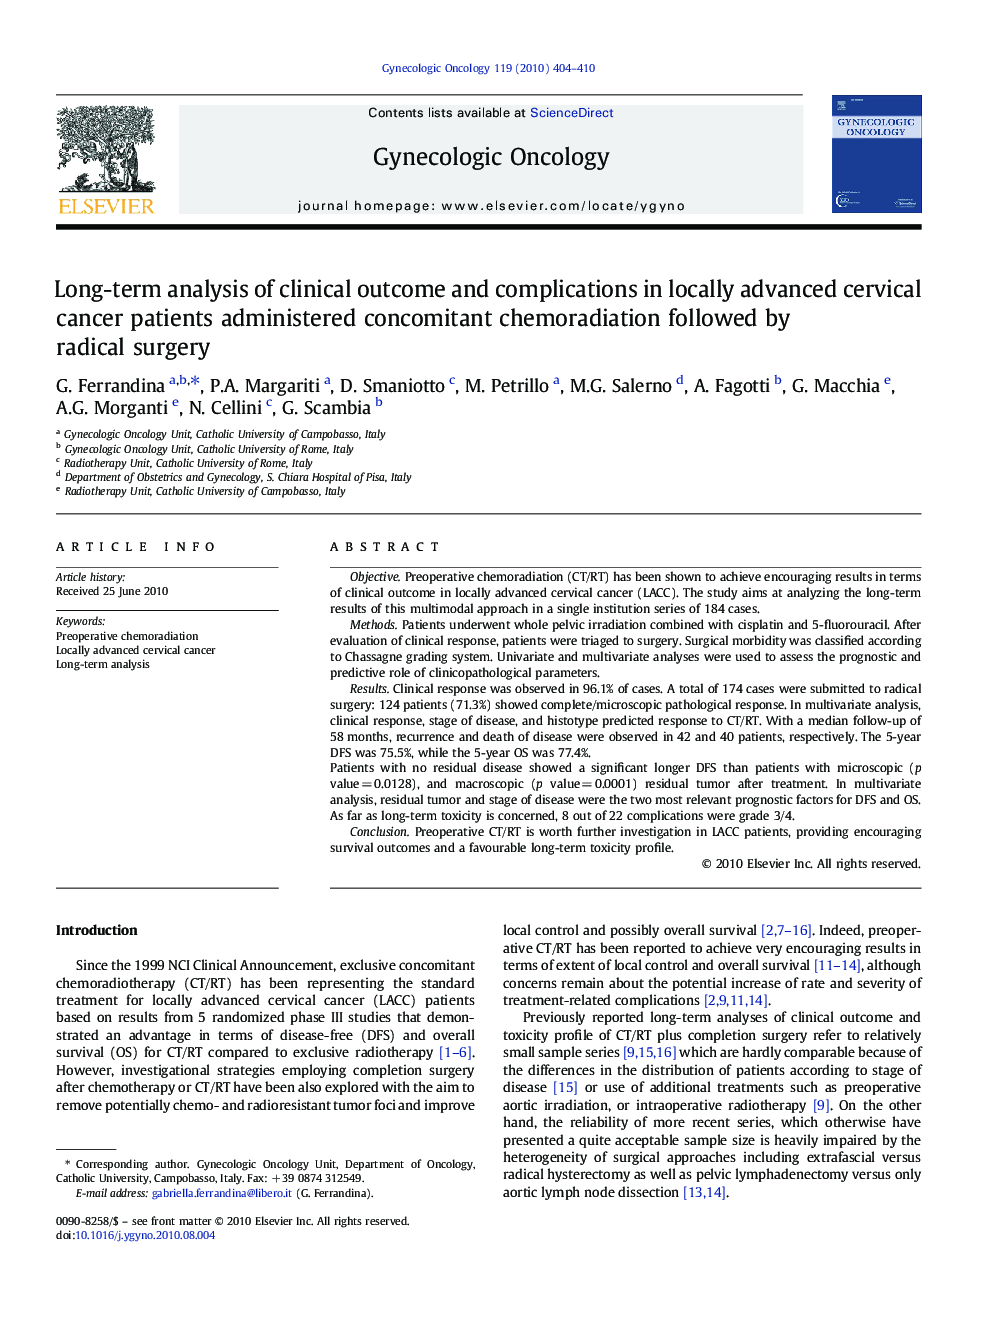 Long-term analysis of clinical outcome and complications in locally advanced cervical cancer patients administered concomitant chemoradiation followed by radical surgery